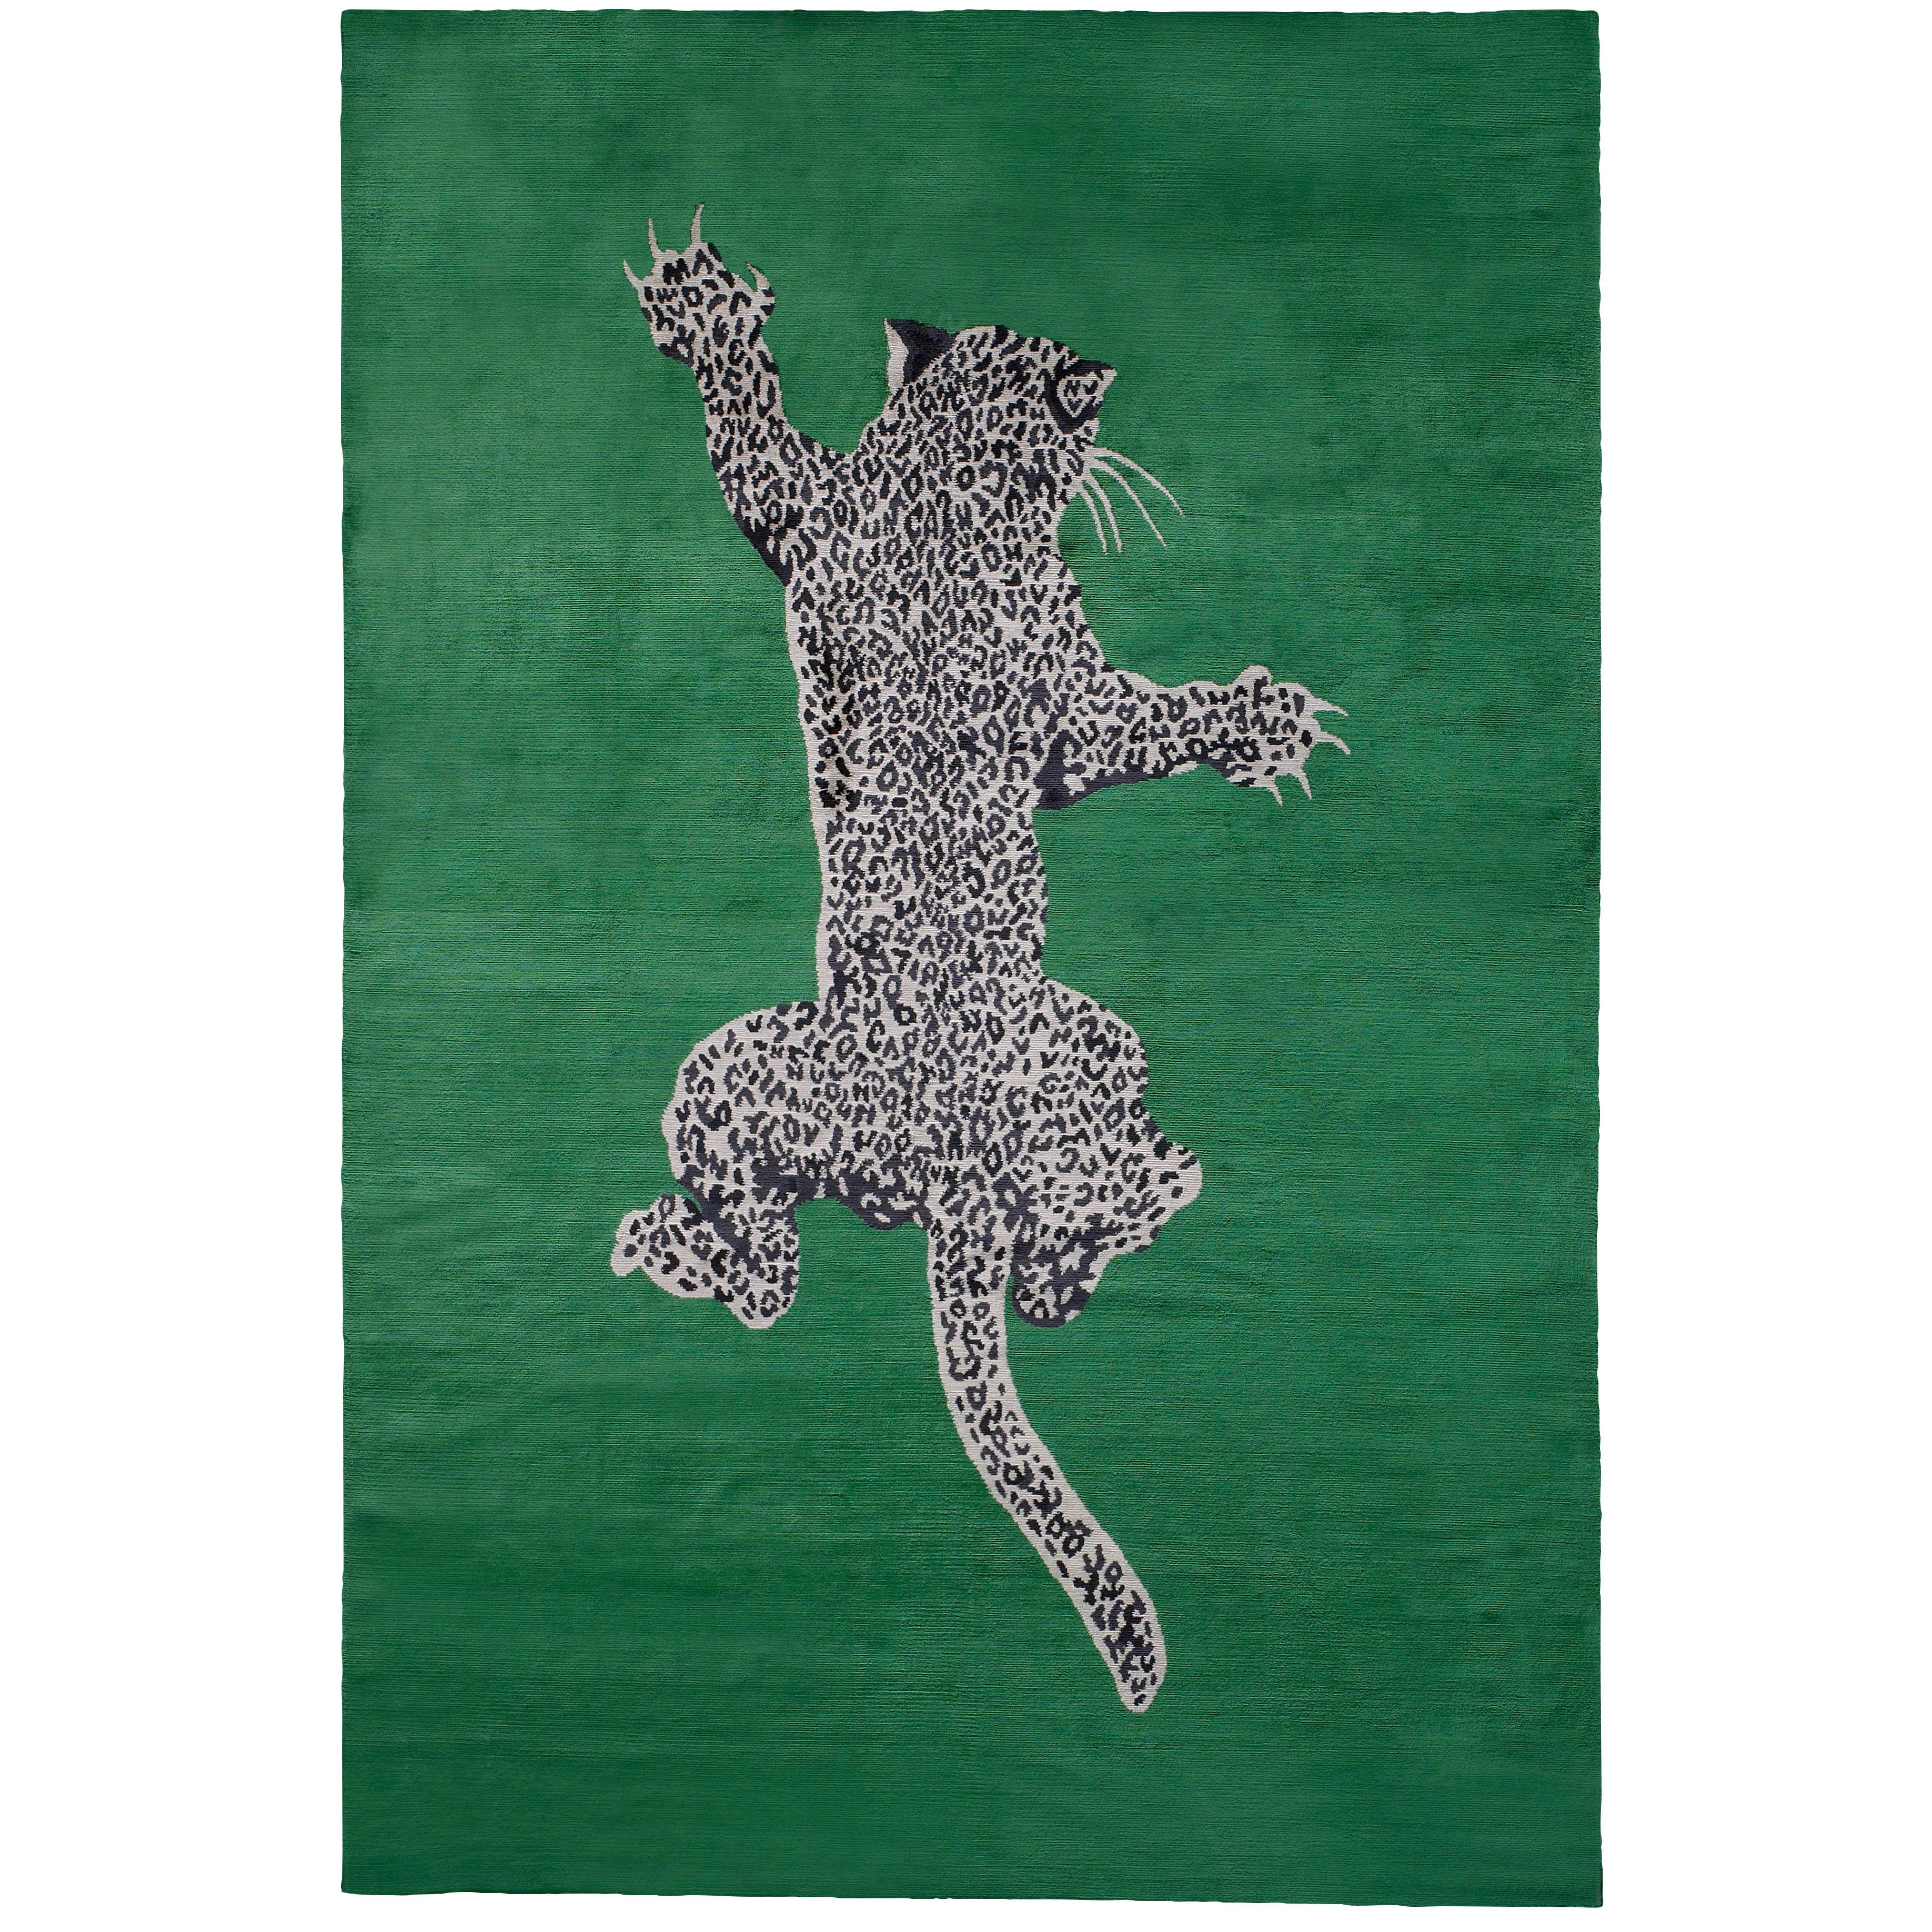 DEPOSIT 1, Climbing Leopard Hand-Knotted 10x8 Rug in Silk by DVF